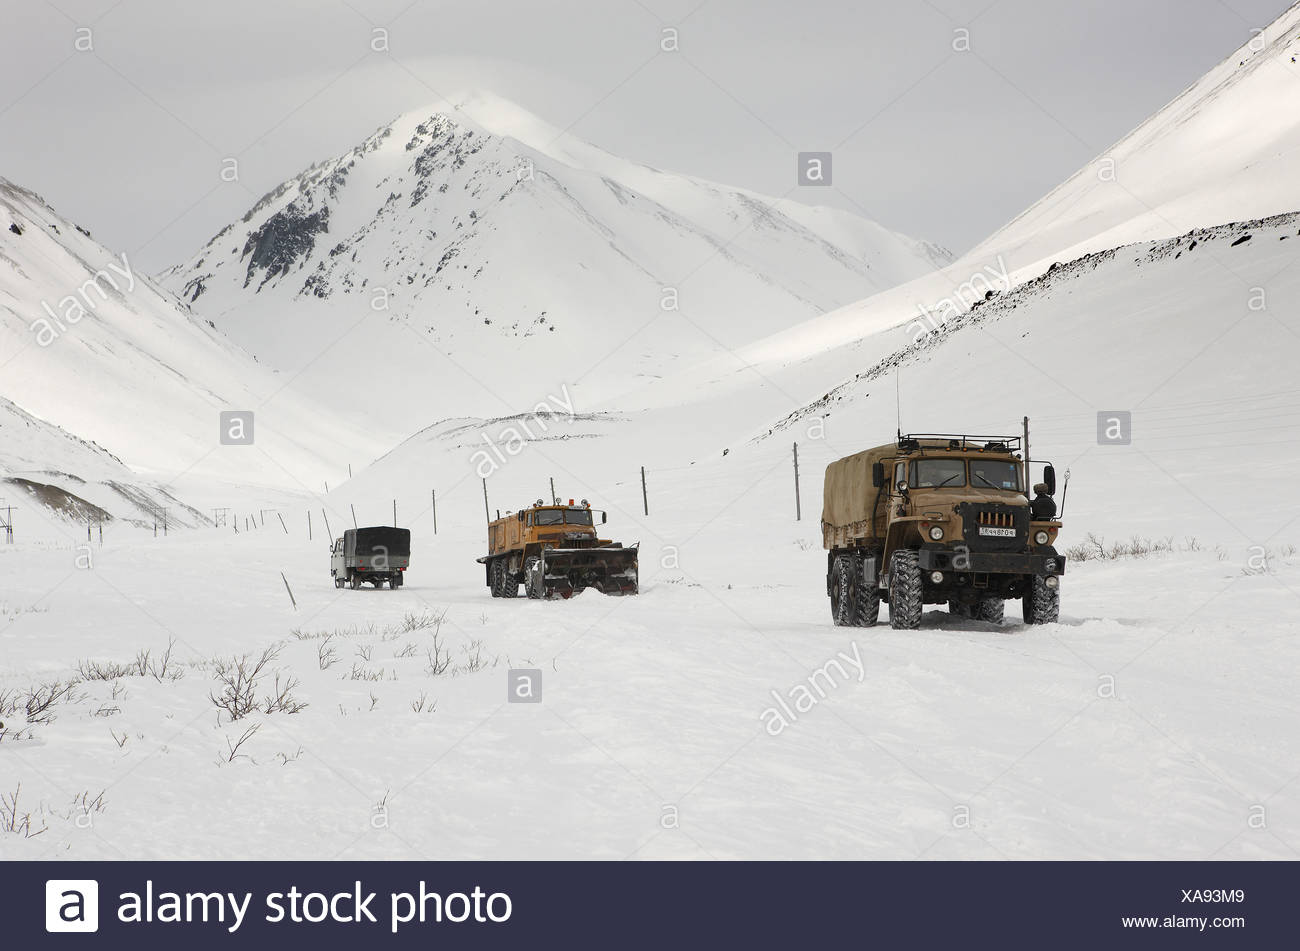 trucks-carrying-food-and-fuel-chukotka-s